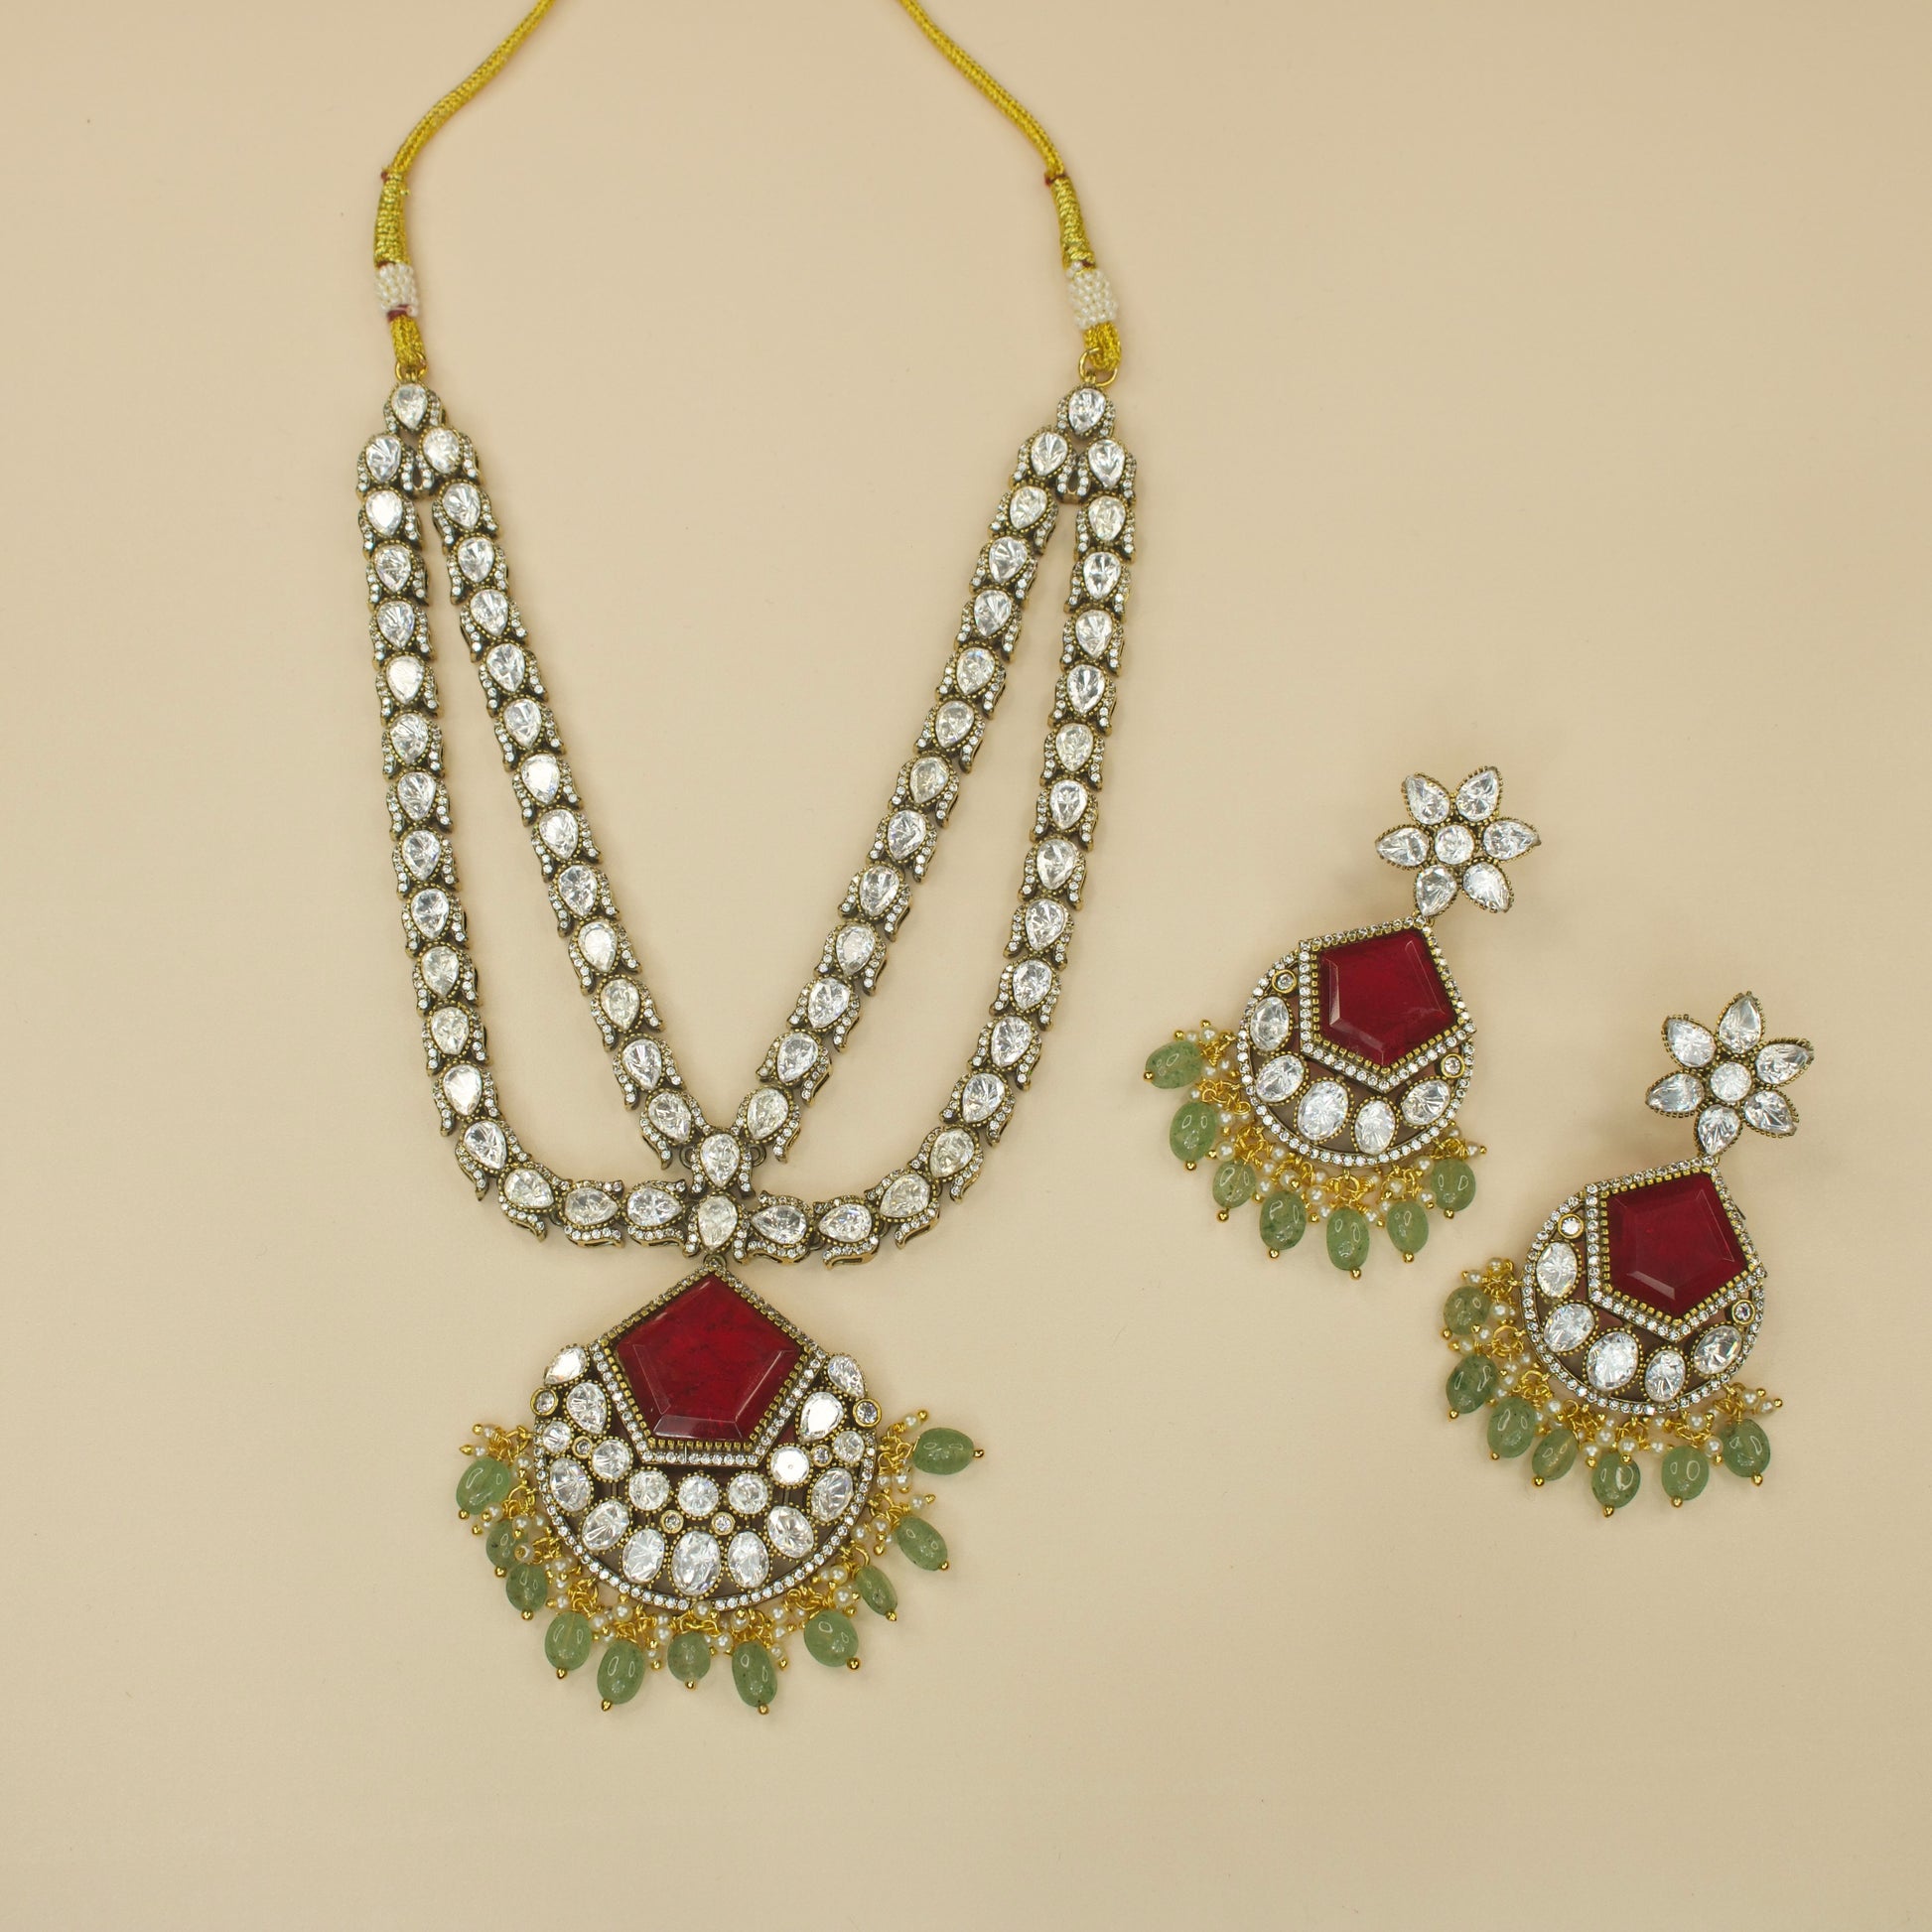 Alluring Two-Line Victorian Necklace Set with zircon, polki, and pearls, and beads, including matching earrings. This Victorian Jewellery is available in Red,Green & Purple colour variants. 